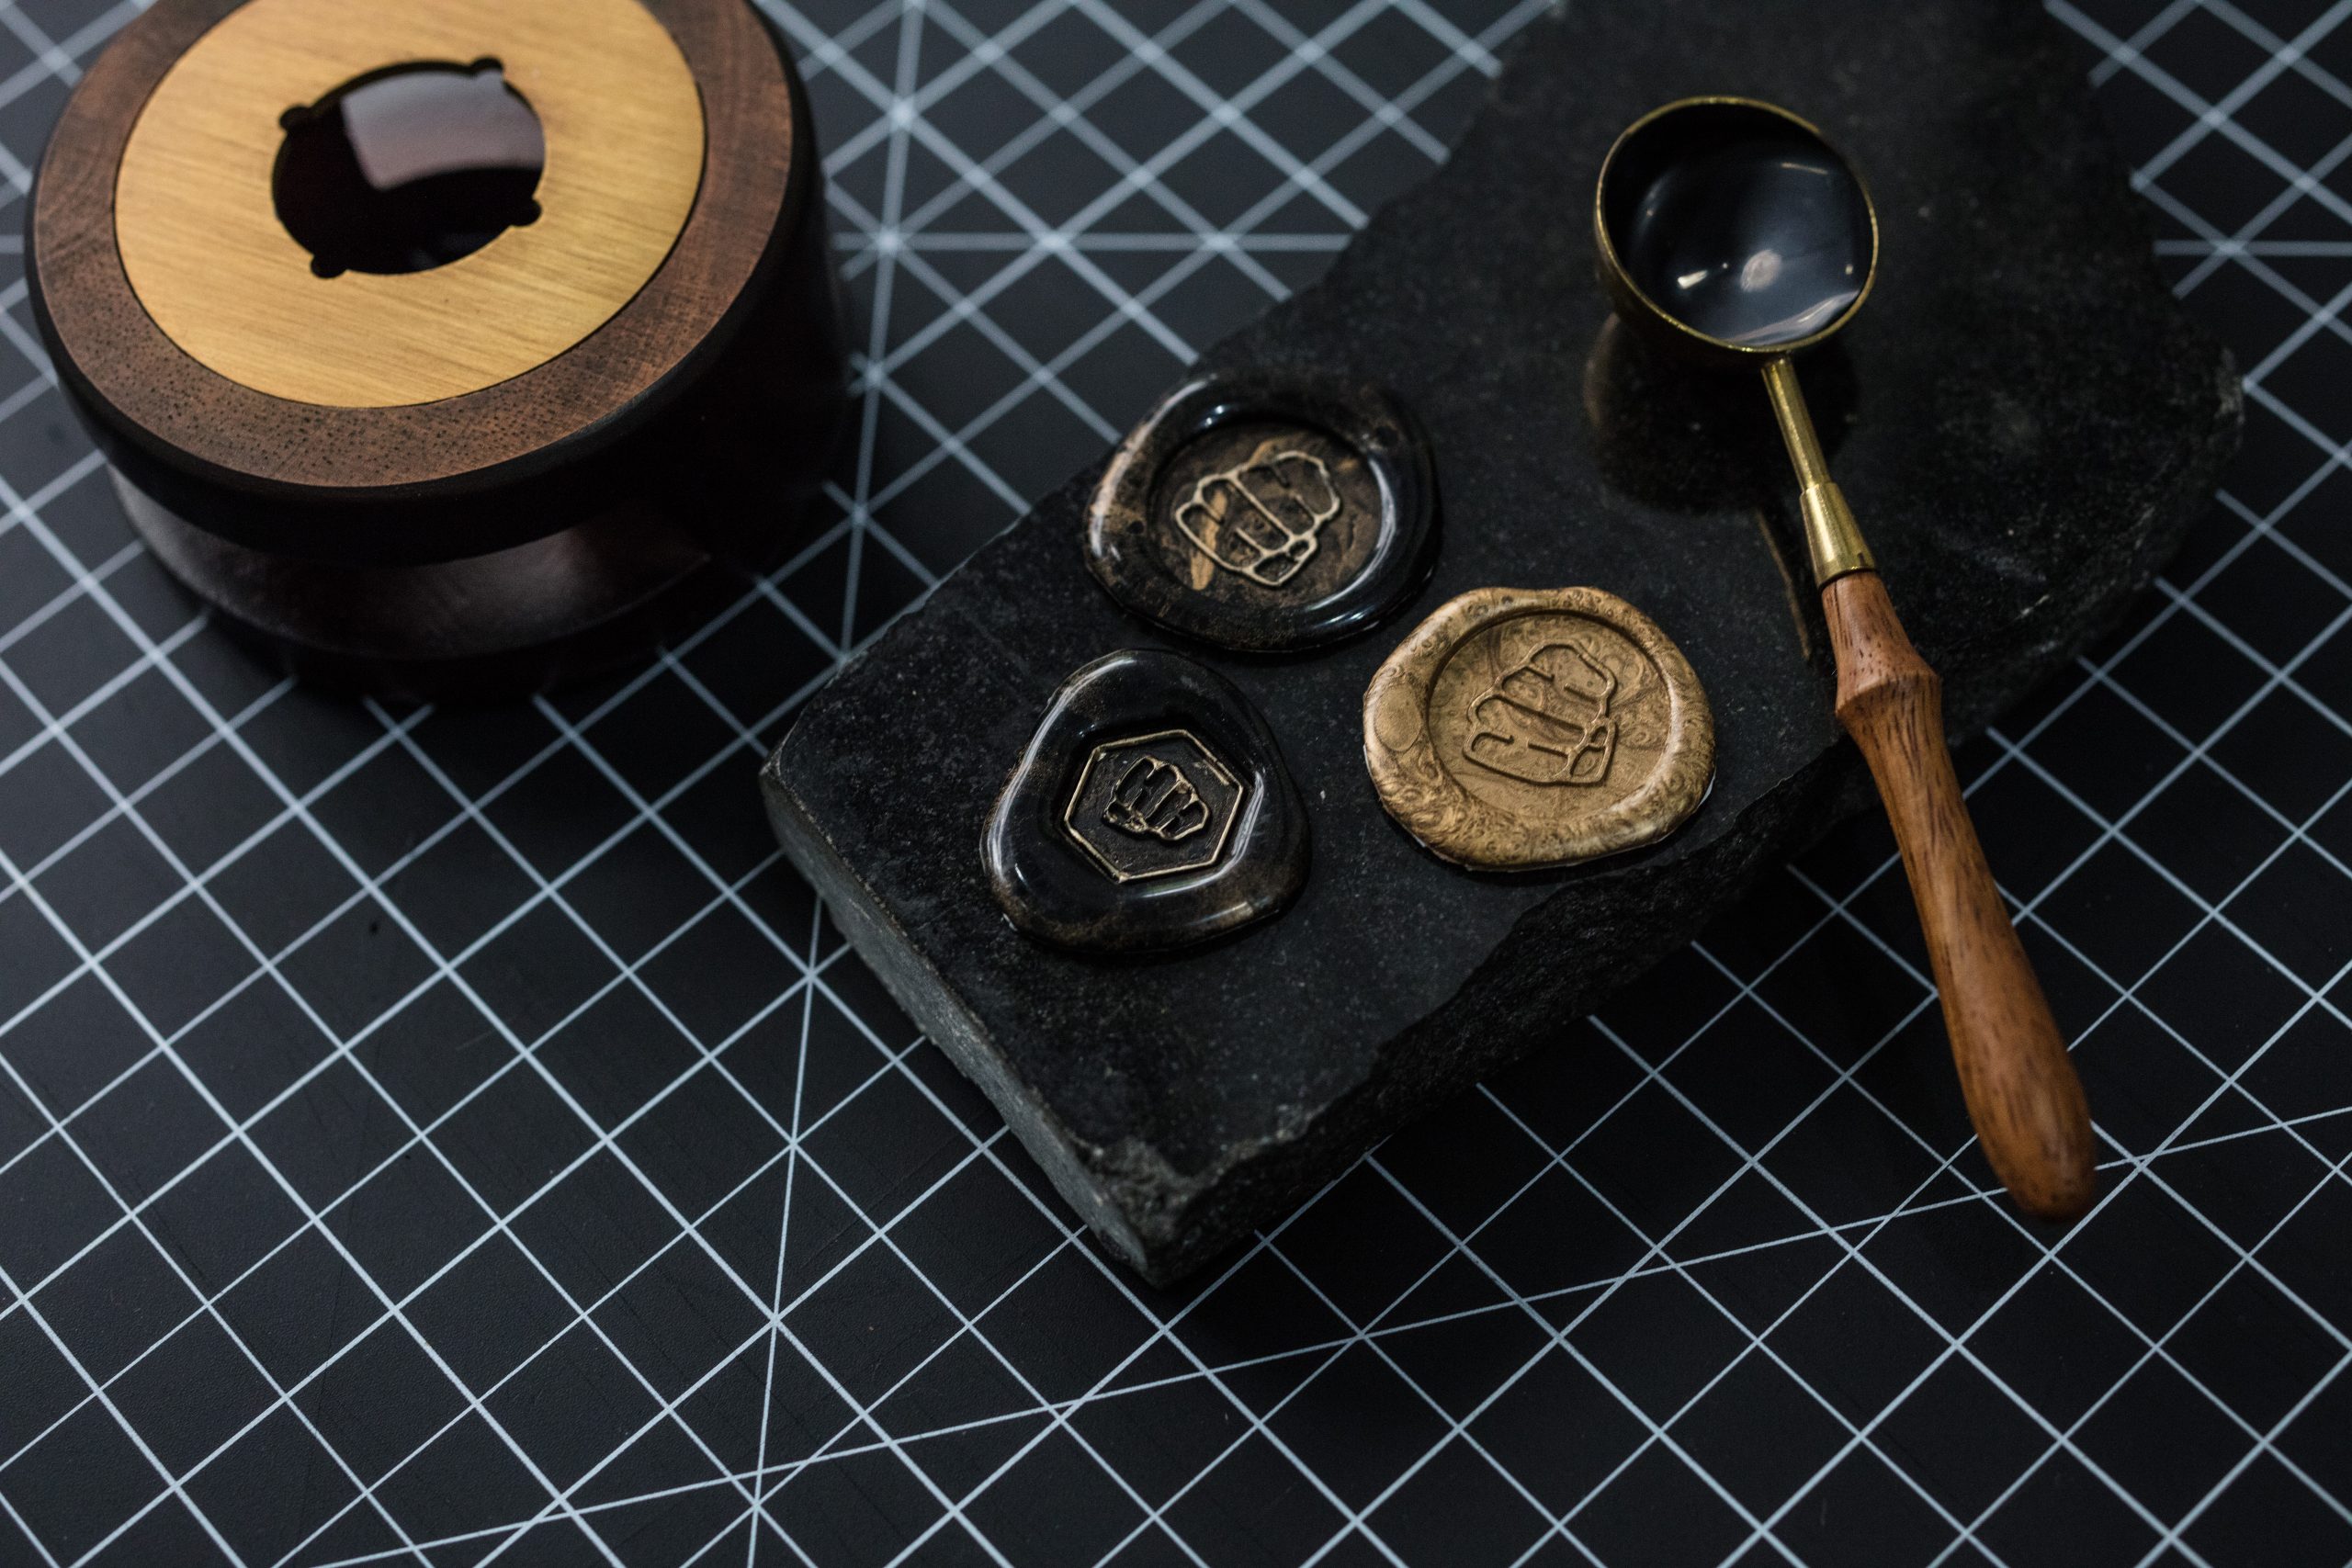 Standard customize wax seal stamp (only stamp head and wooden handle)